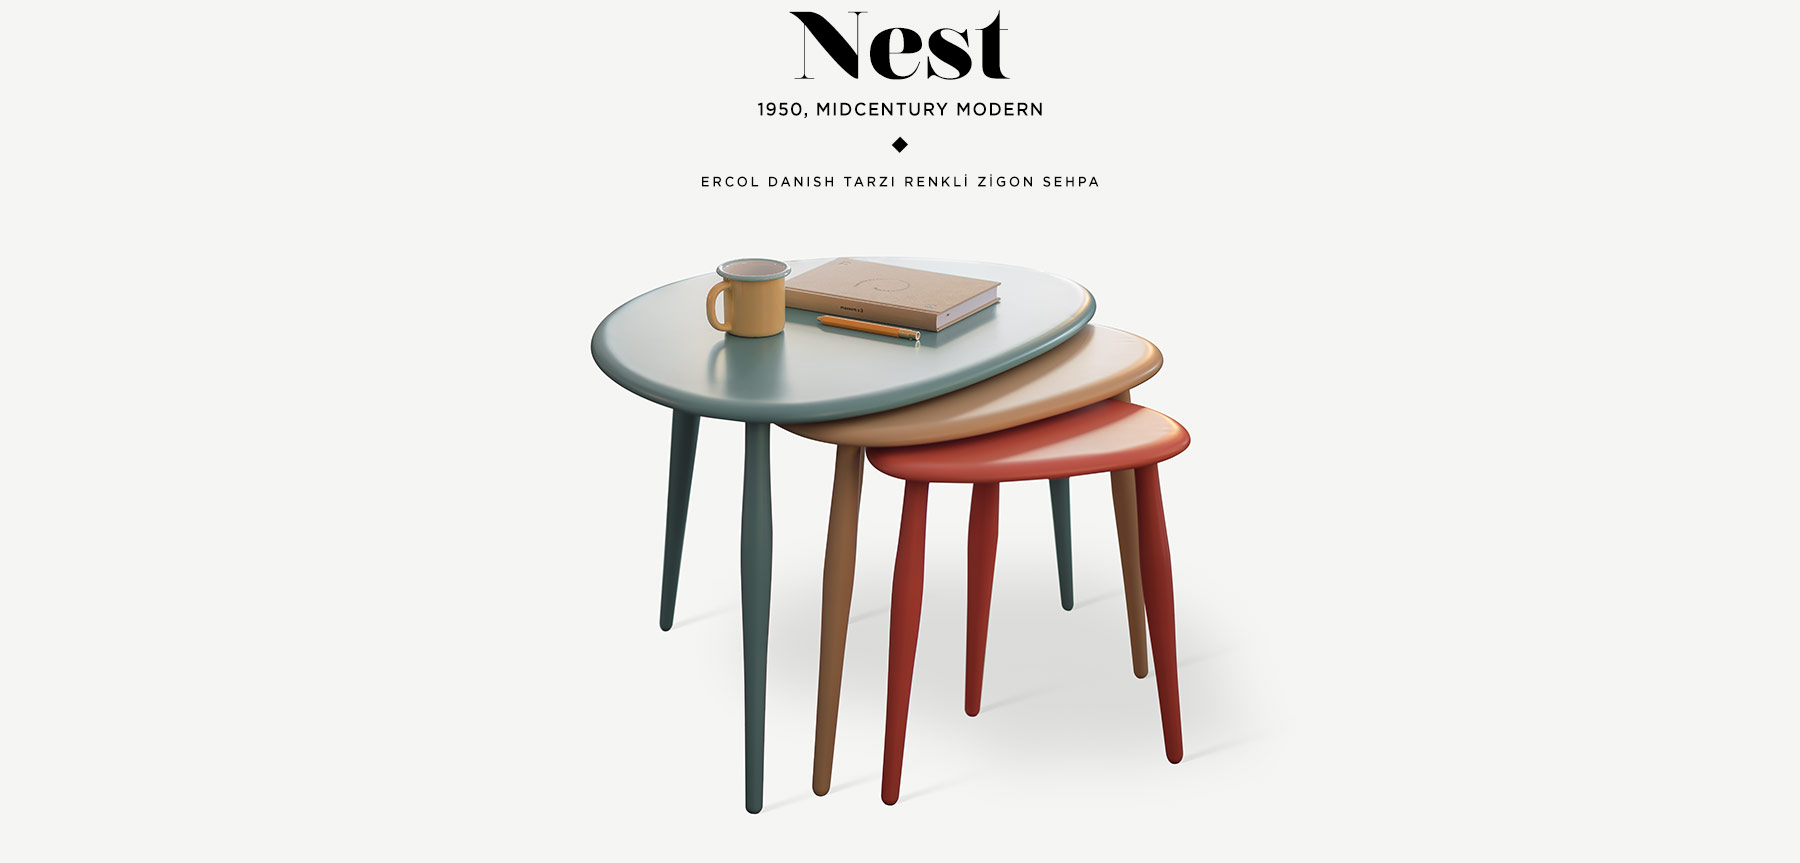 ercol "nest of table" zigon sehpa'in resmi